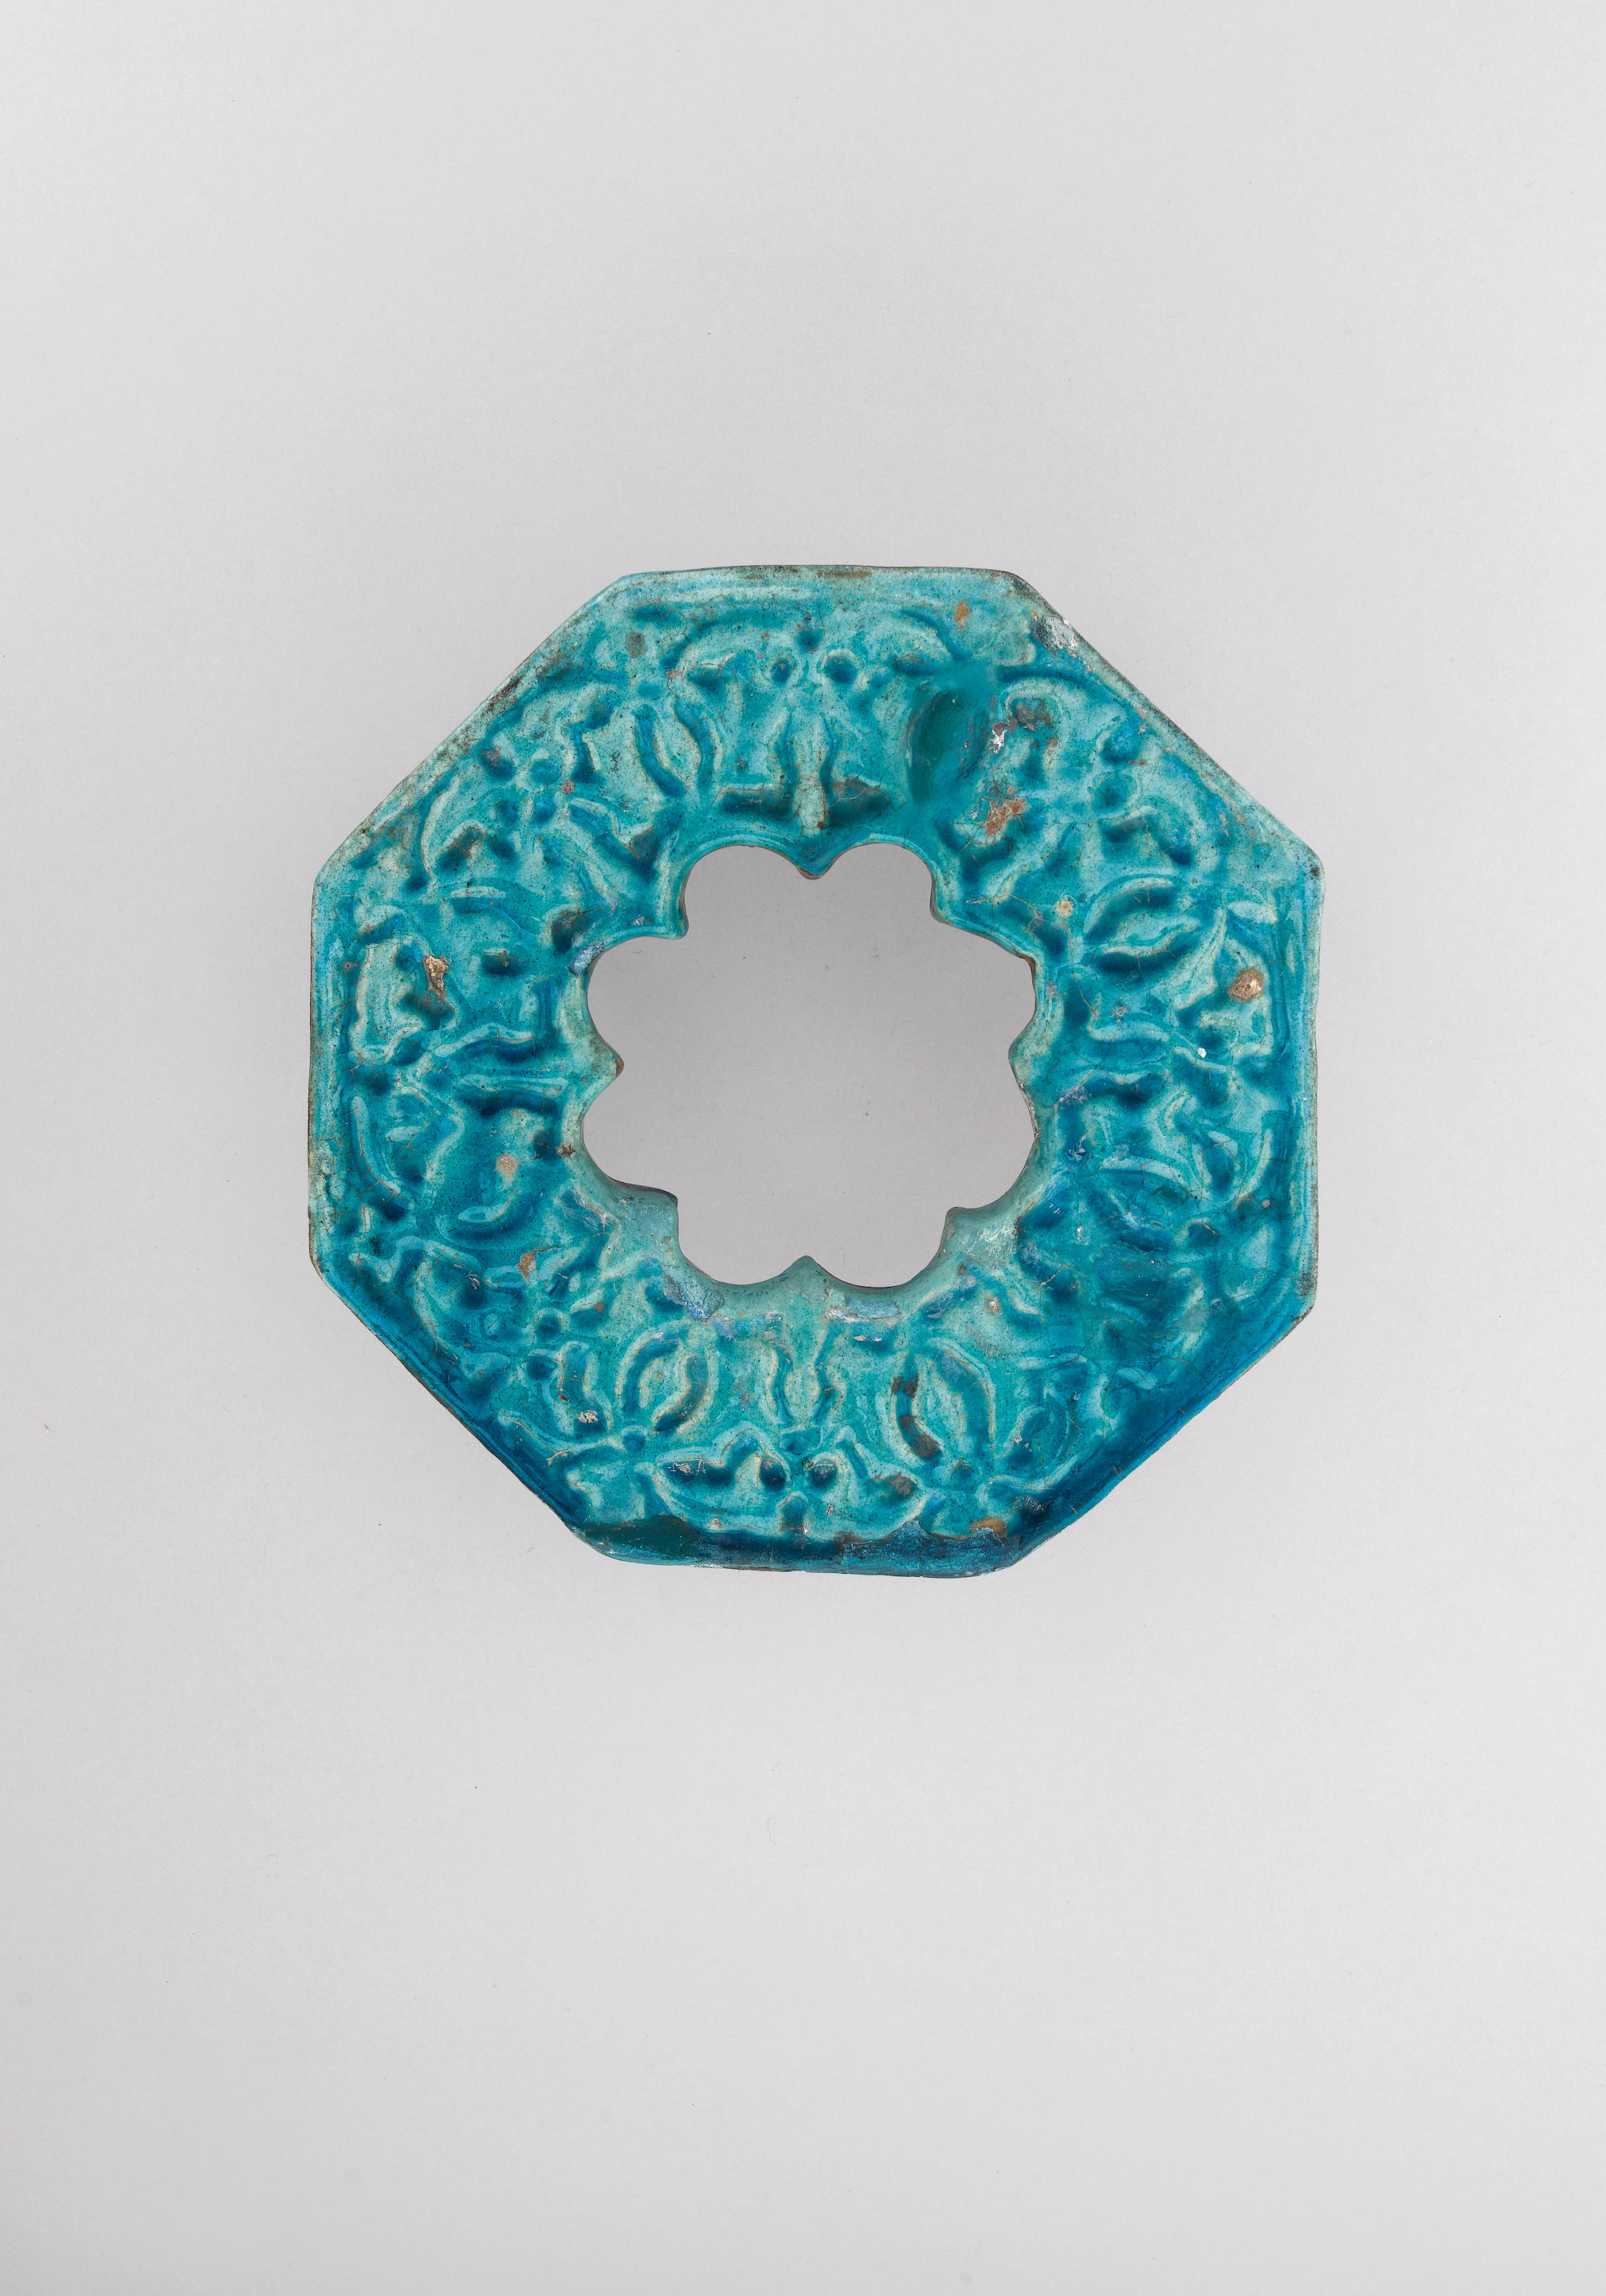 A Kashan Monochrome Moulded Pottery Tile Persia 12th 13th Century Auctions And Price Archive